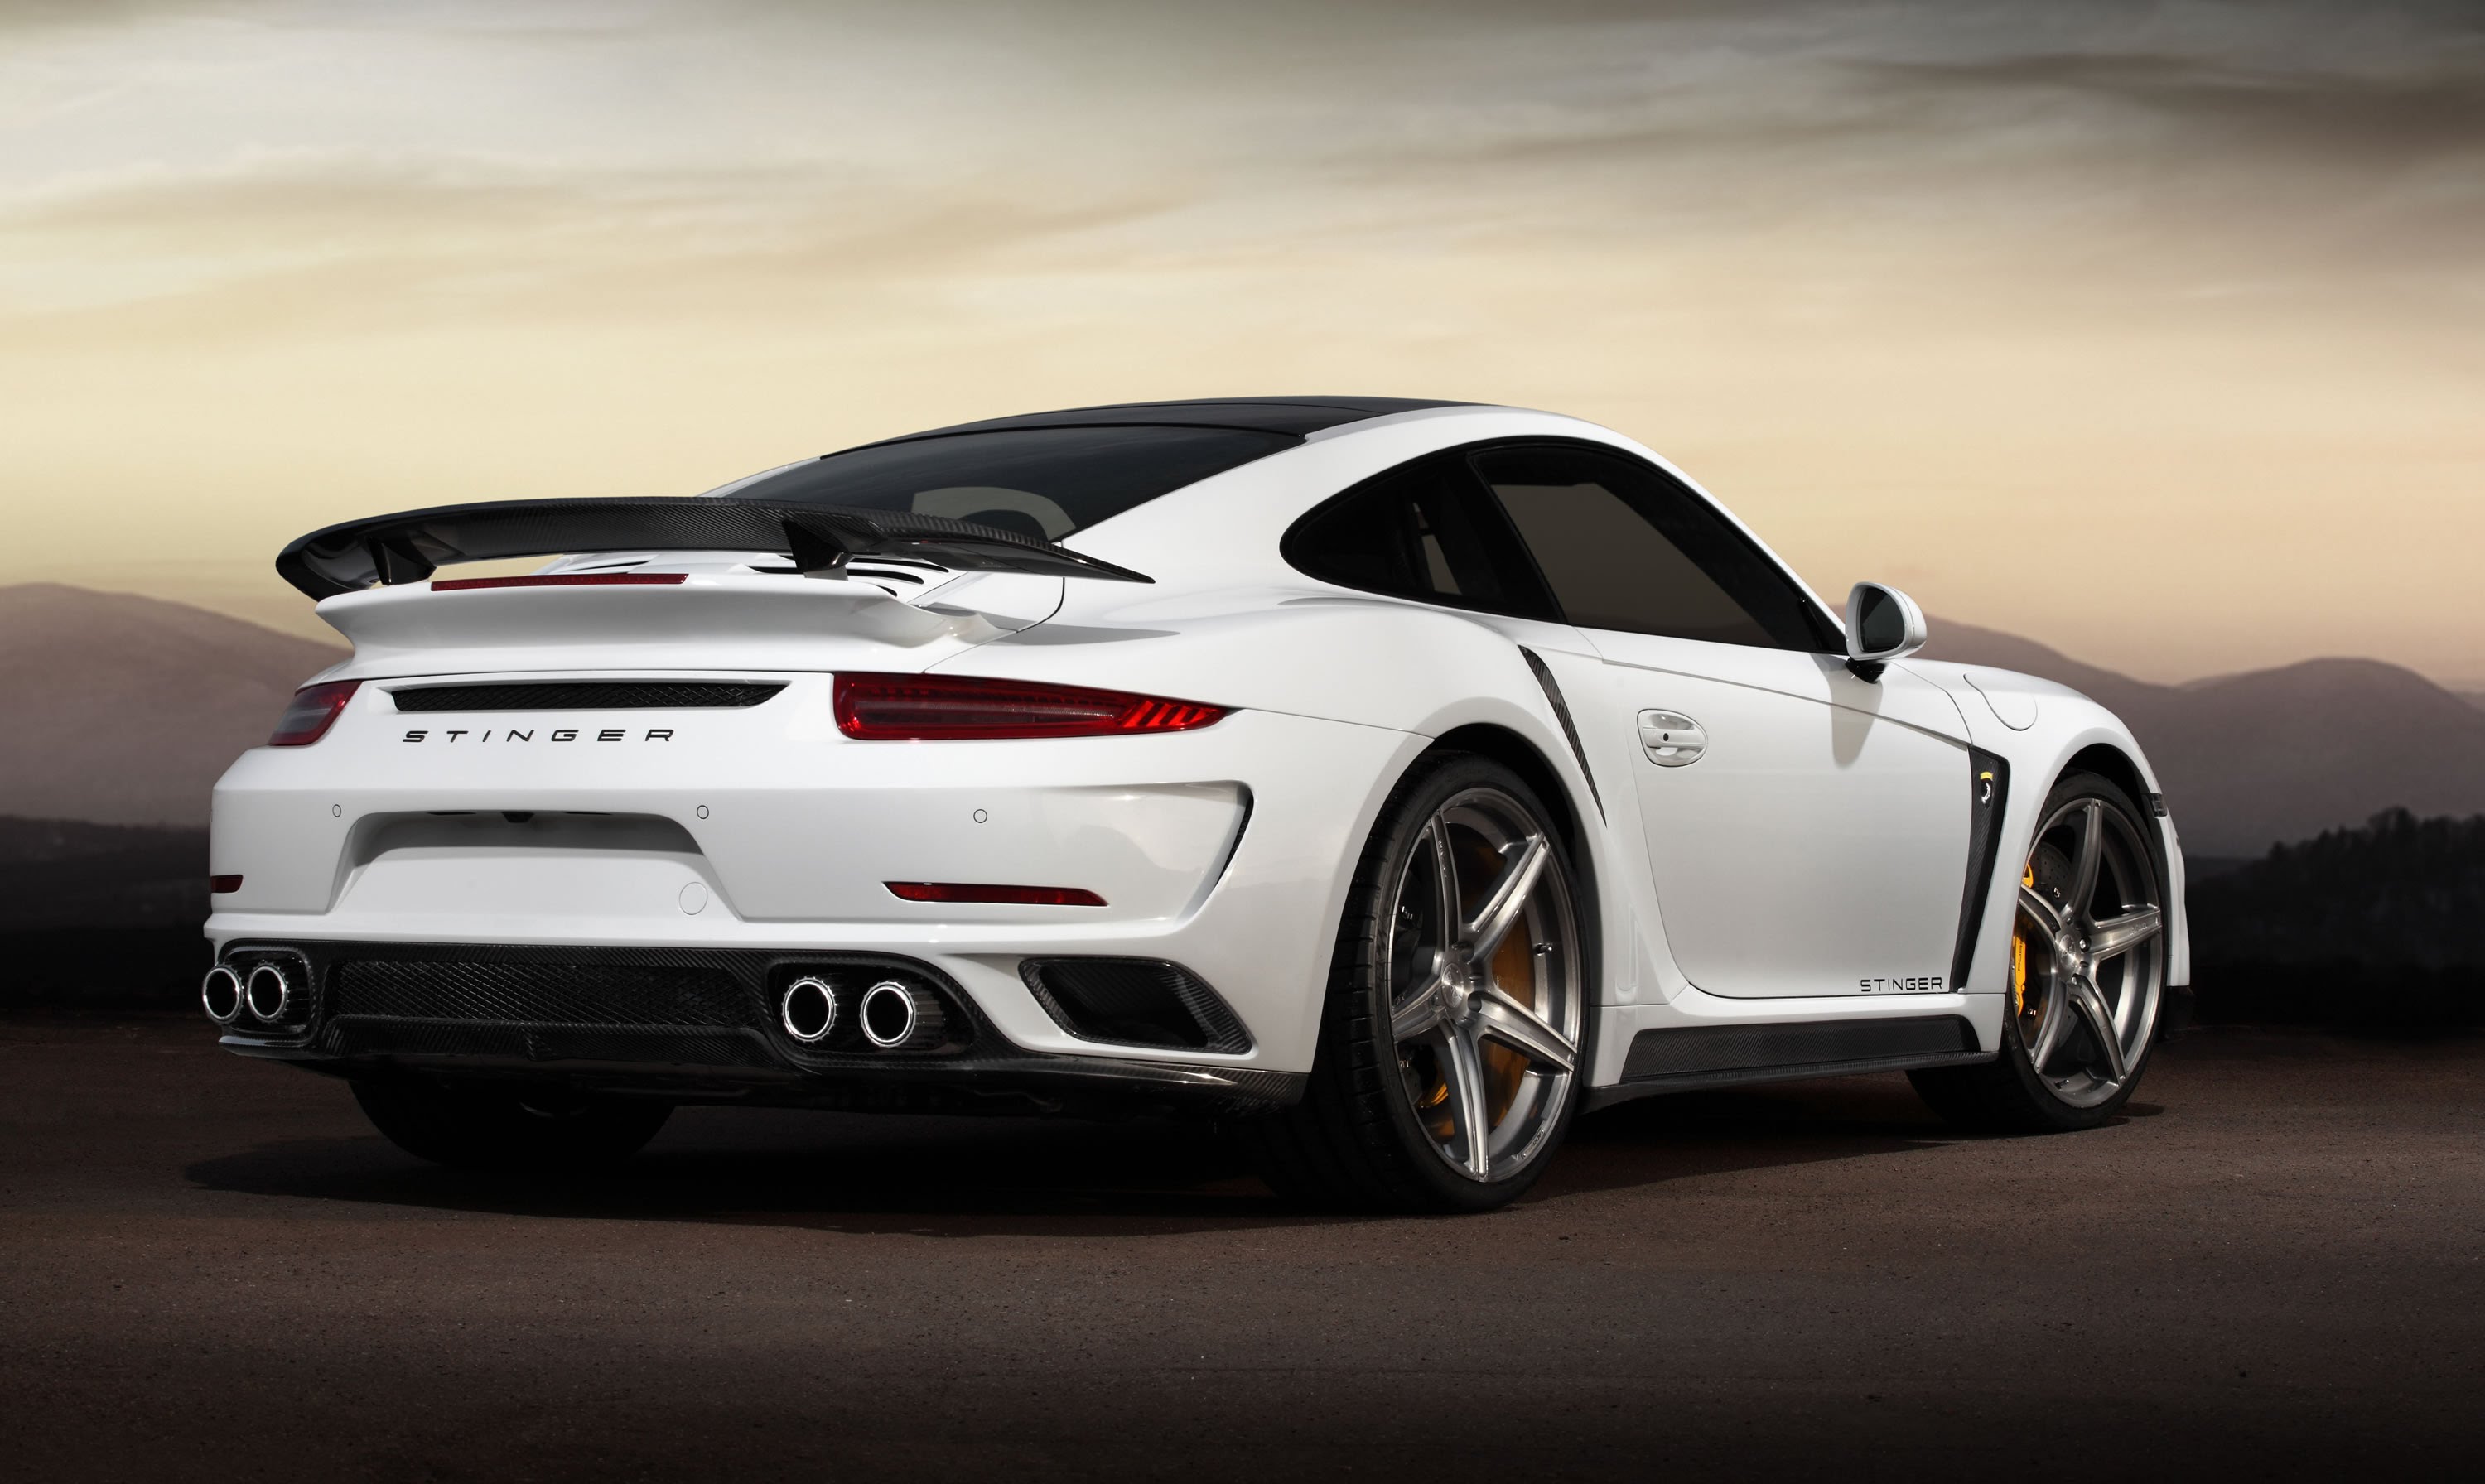 2016 Porsche 911 Turbo S, HD Cars, 4k Wallpapers, Images, Backgrounds ...